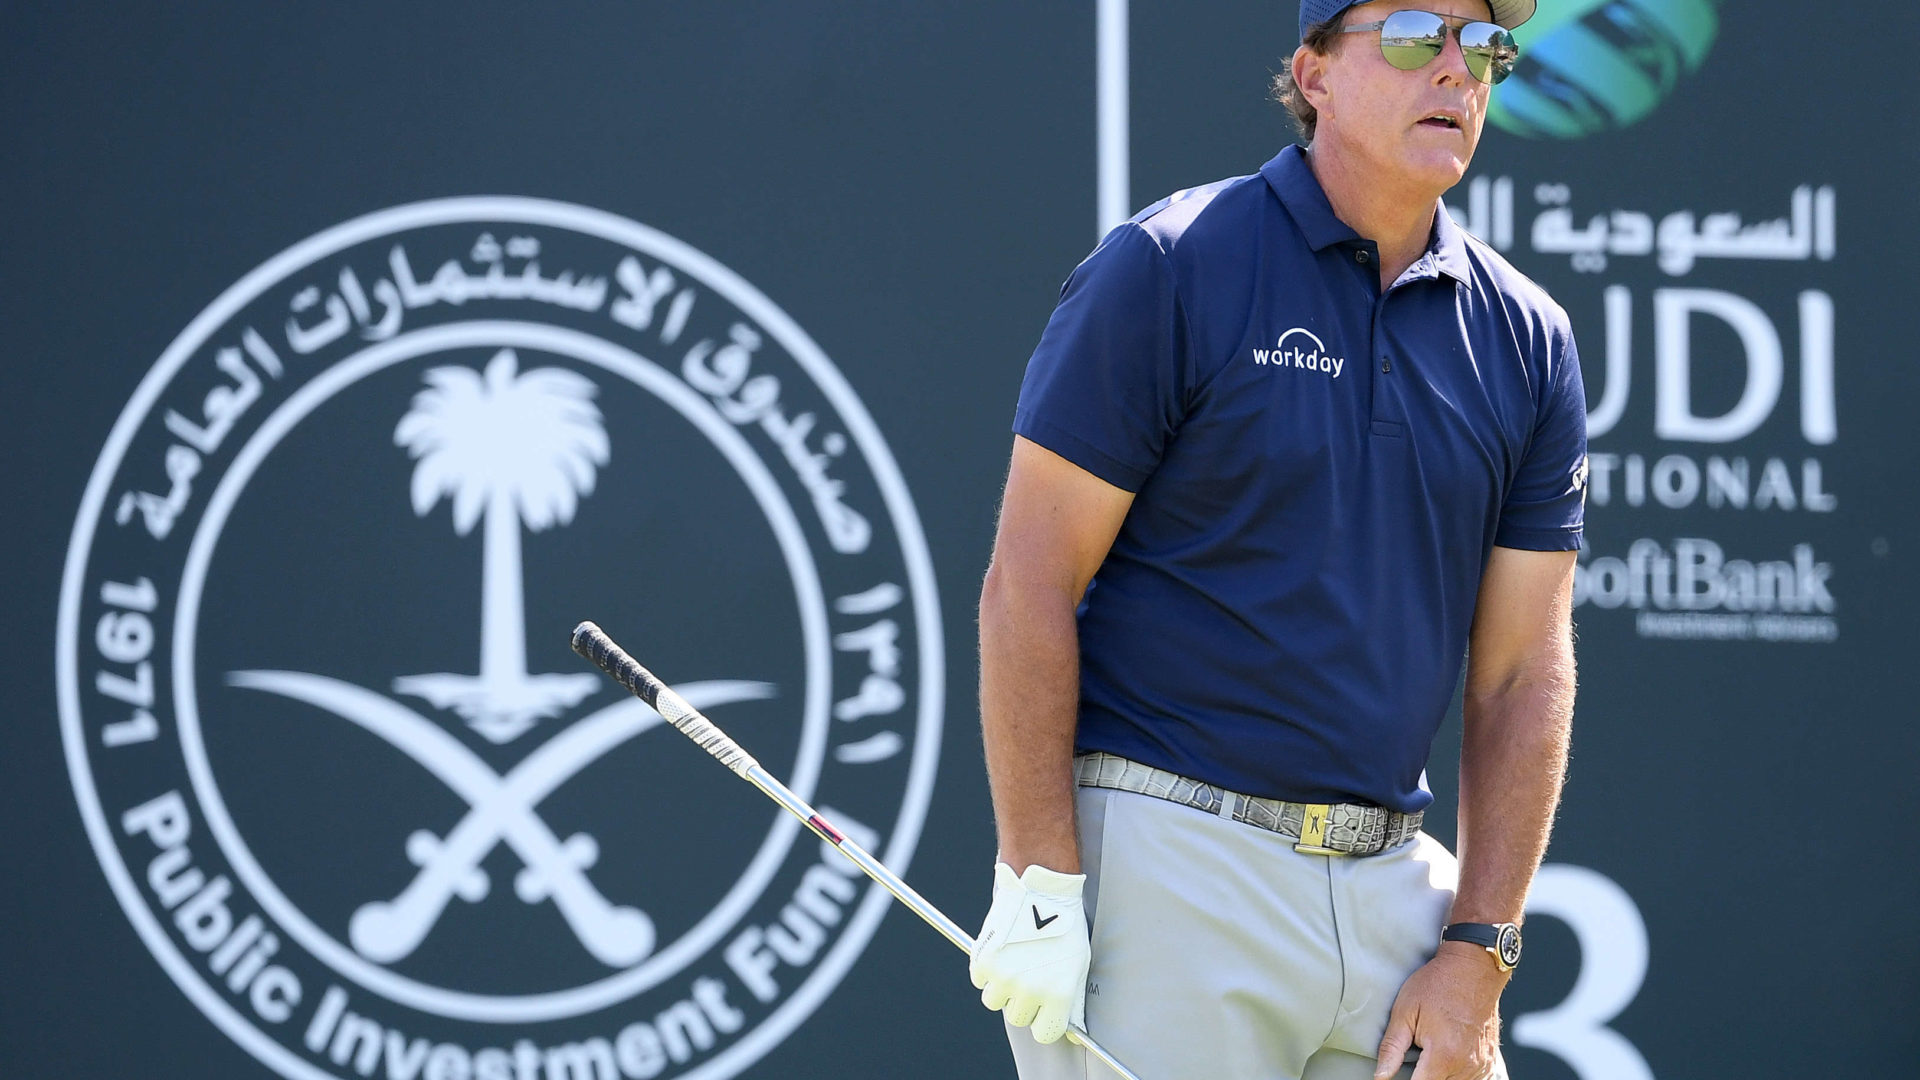 KAEC, SAUDI ARABIA - FEBRUARY 06: Phil Mickelson of the USA in action during the third round of the Saudi International powered by SoftBank Investment Advisers at Royal Greens Golf and Country Club on February 06, 2021 in King Abdullah Economic City, Saudi Arabia. (Photo by Ross Kinnaird/Getty Images)